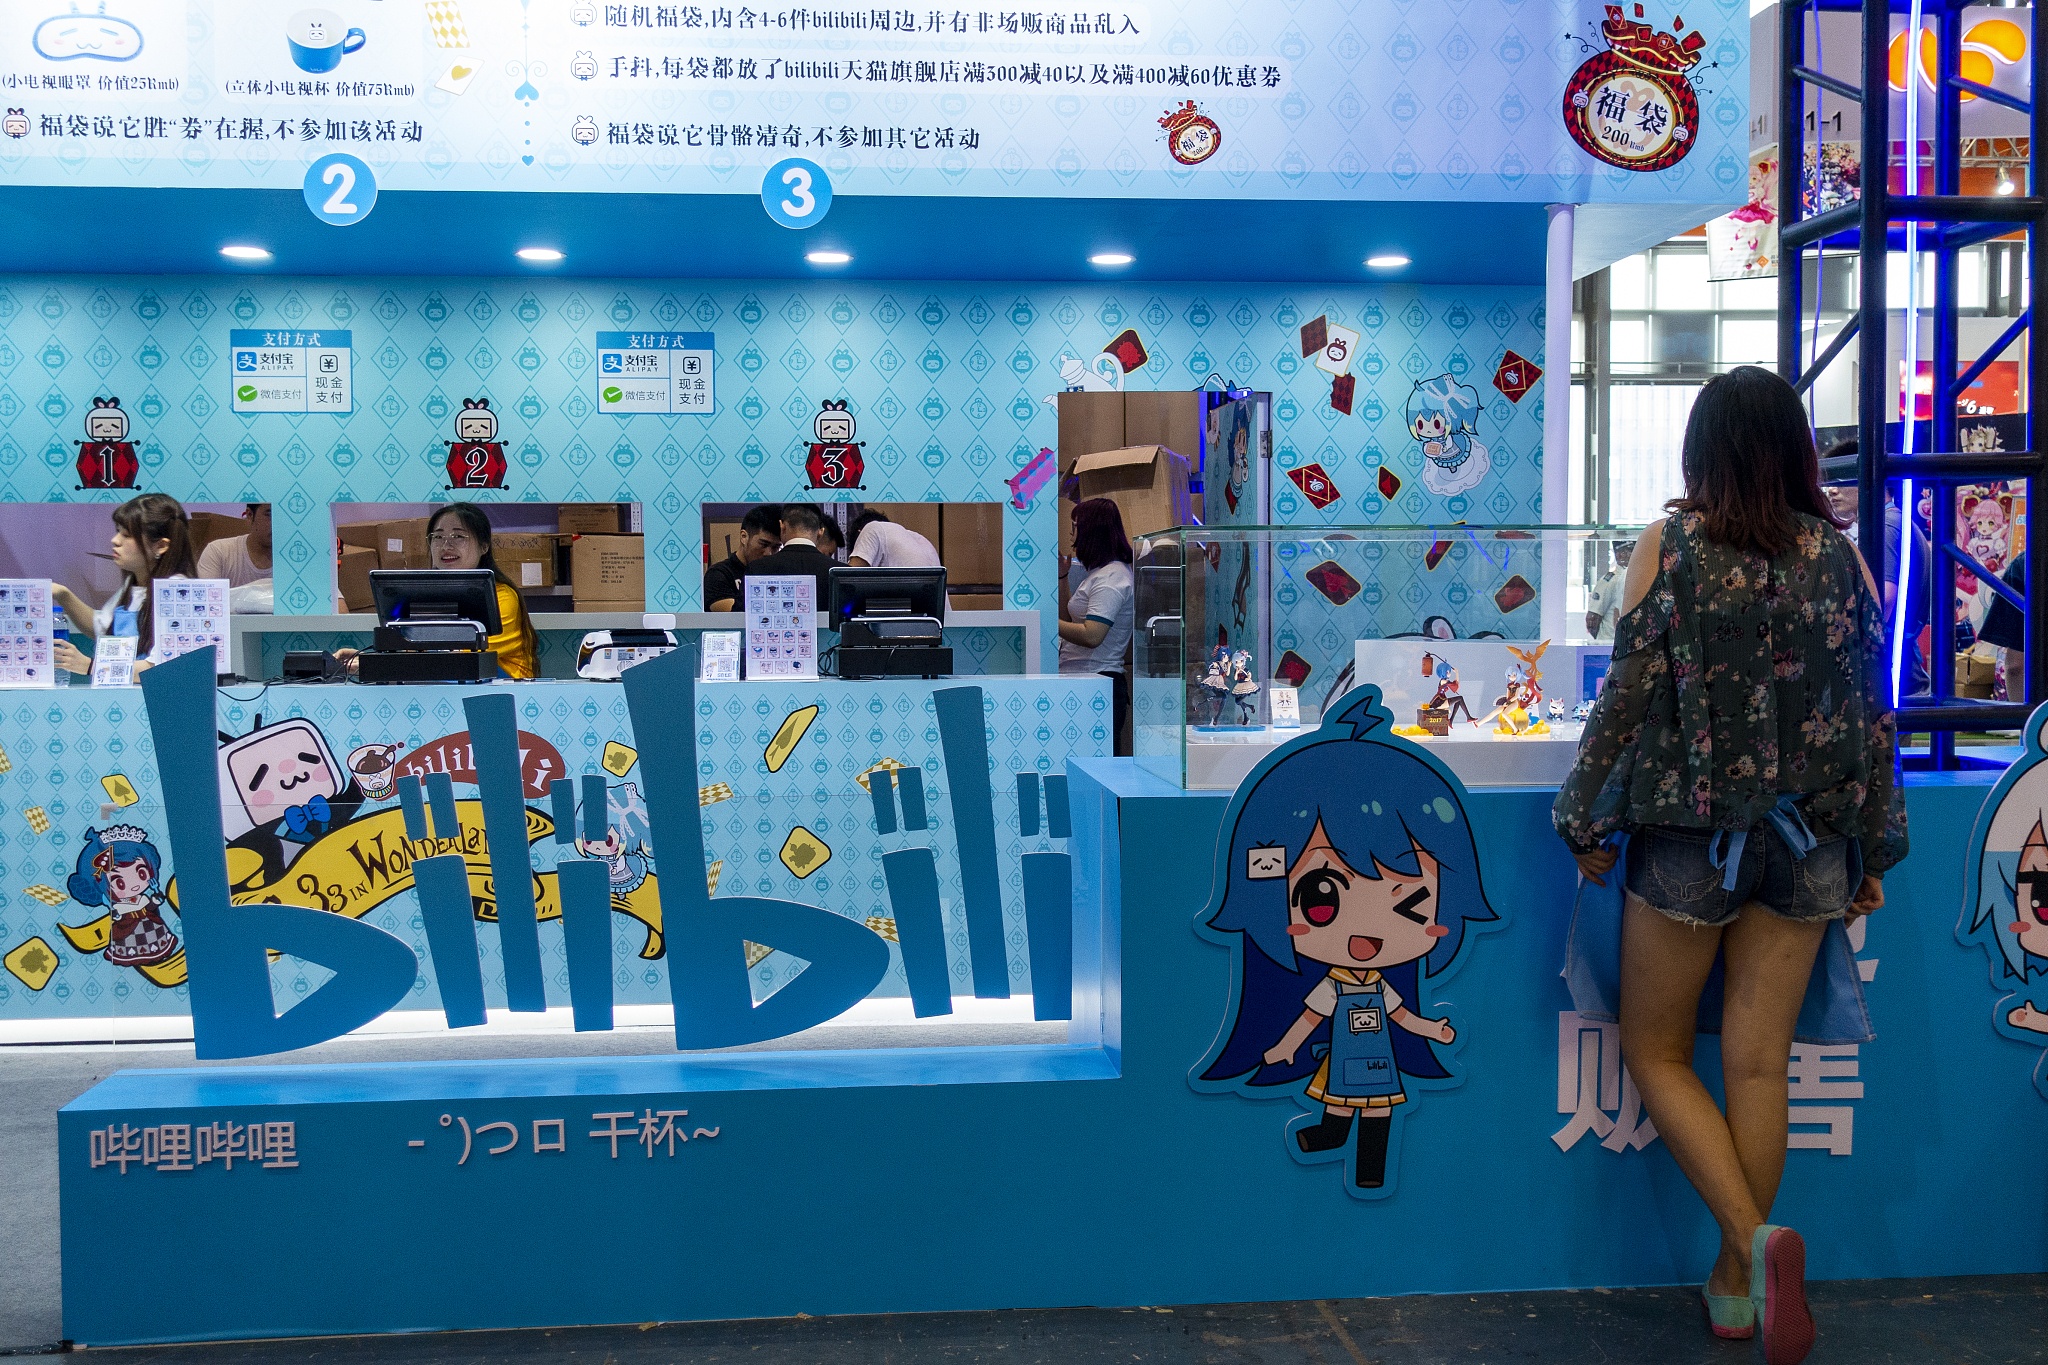 Video streaming site Bilibili teamed up with Alibaba’s online marketplace Taobao, seeking to monopolize on the content-driven e-commerce. Photo: VCG